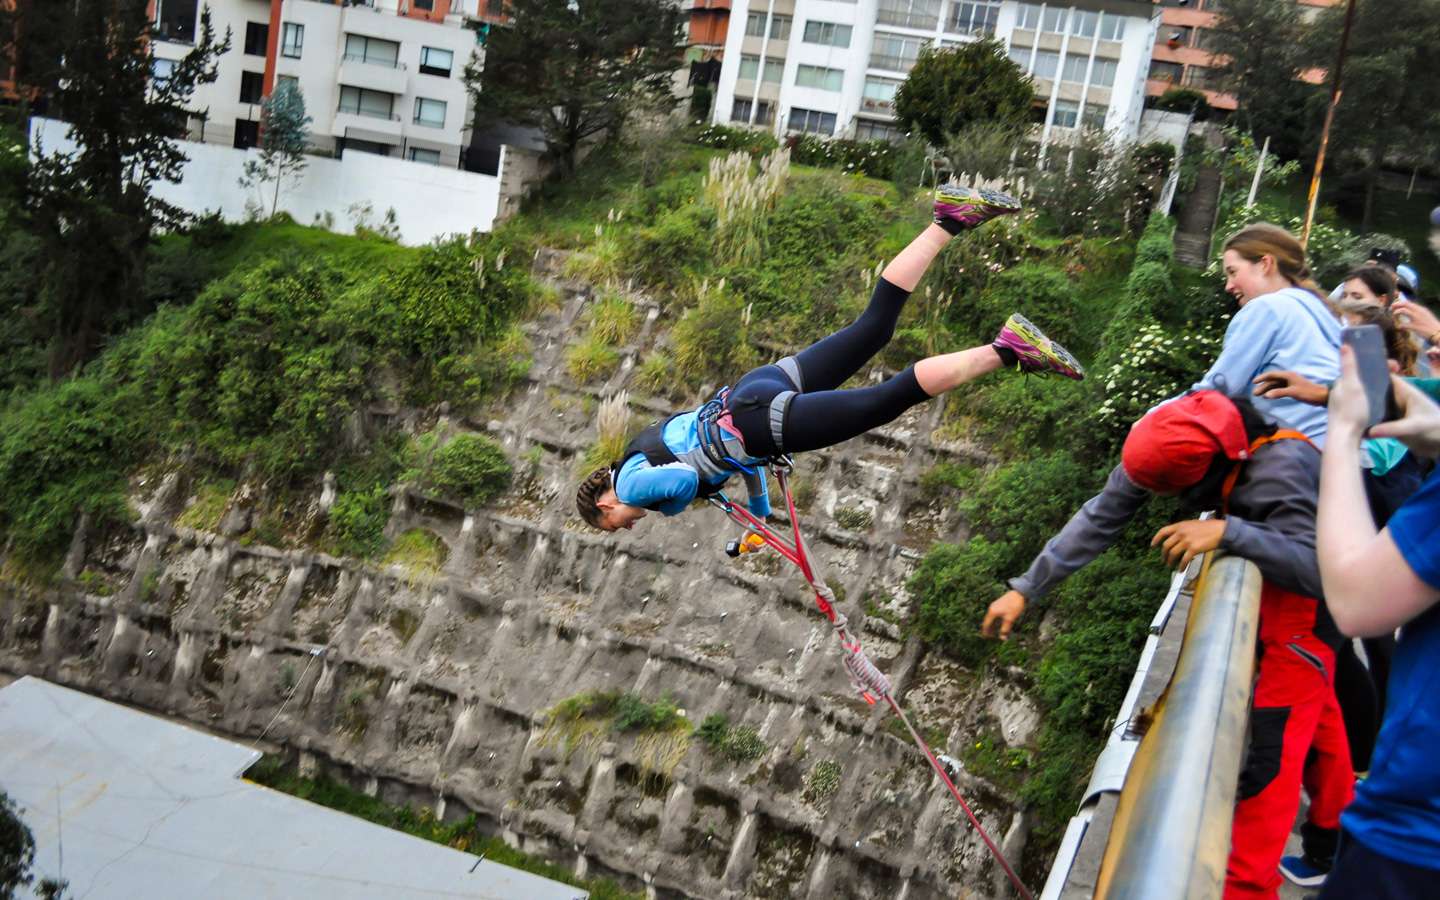 A courageous Spanish student gets thrown off of a bridge during Bungie Jumping activity